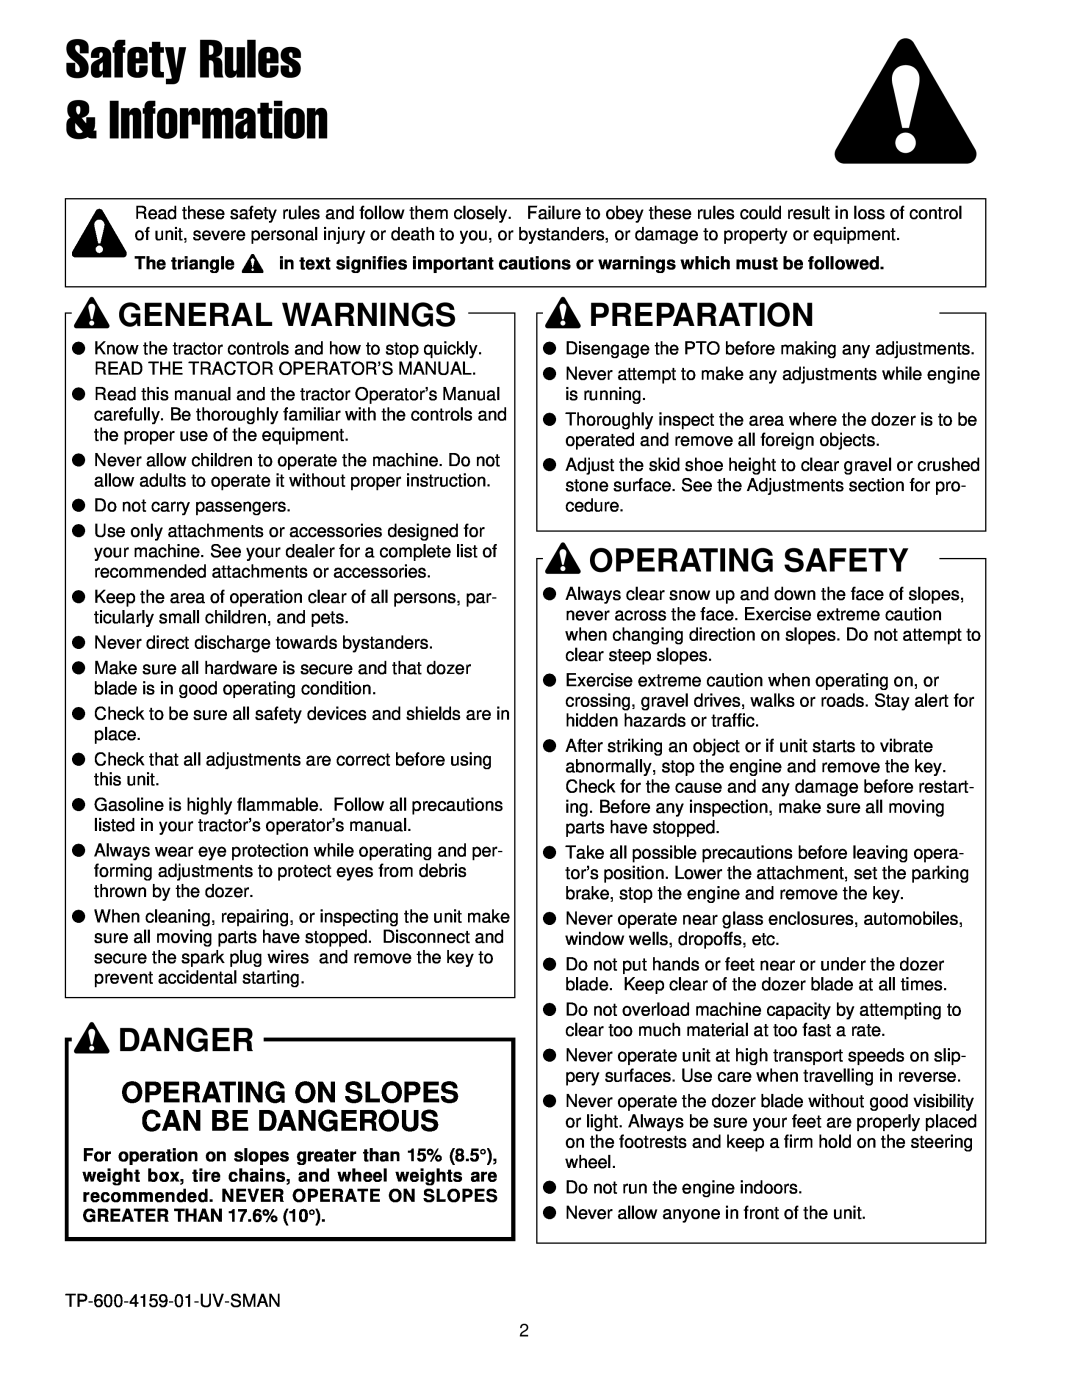 Briggs & Stratton 1694919 Safety Rules Information, General Warnings, Danger, Preparation, Operating Safety, The triangle 